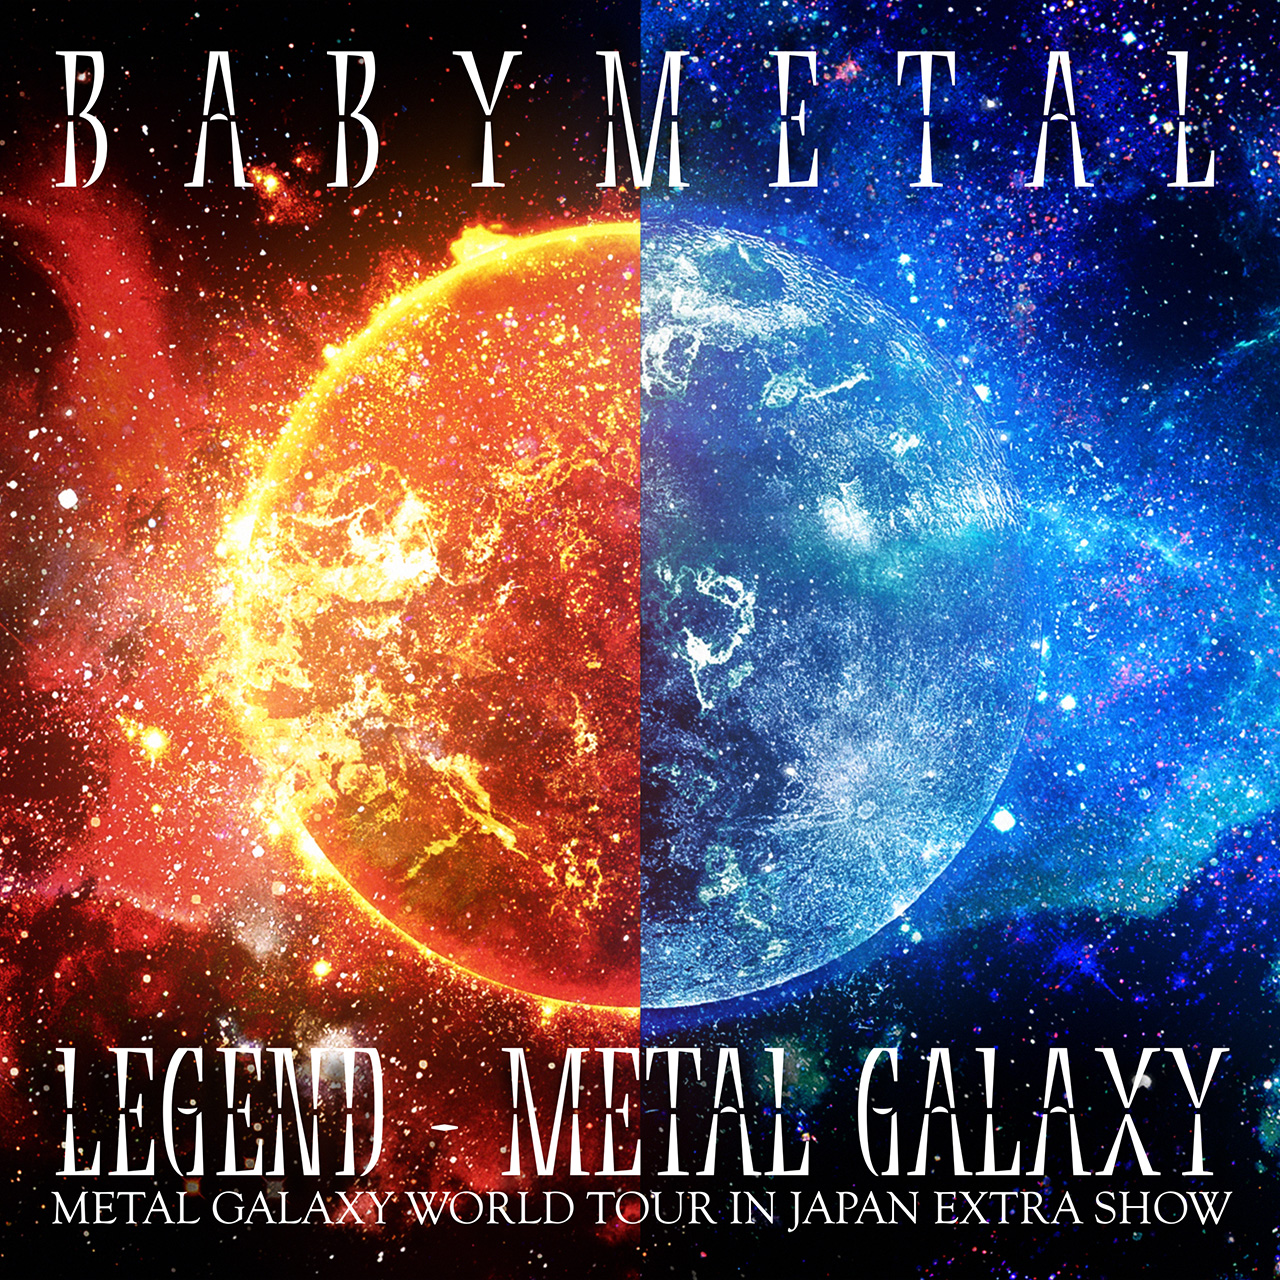 LEGEND – METAL GALAXY” LIVE ALBUM Will Be Digitally Available 